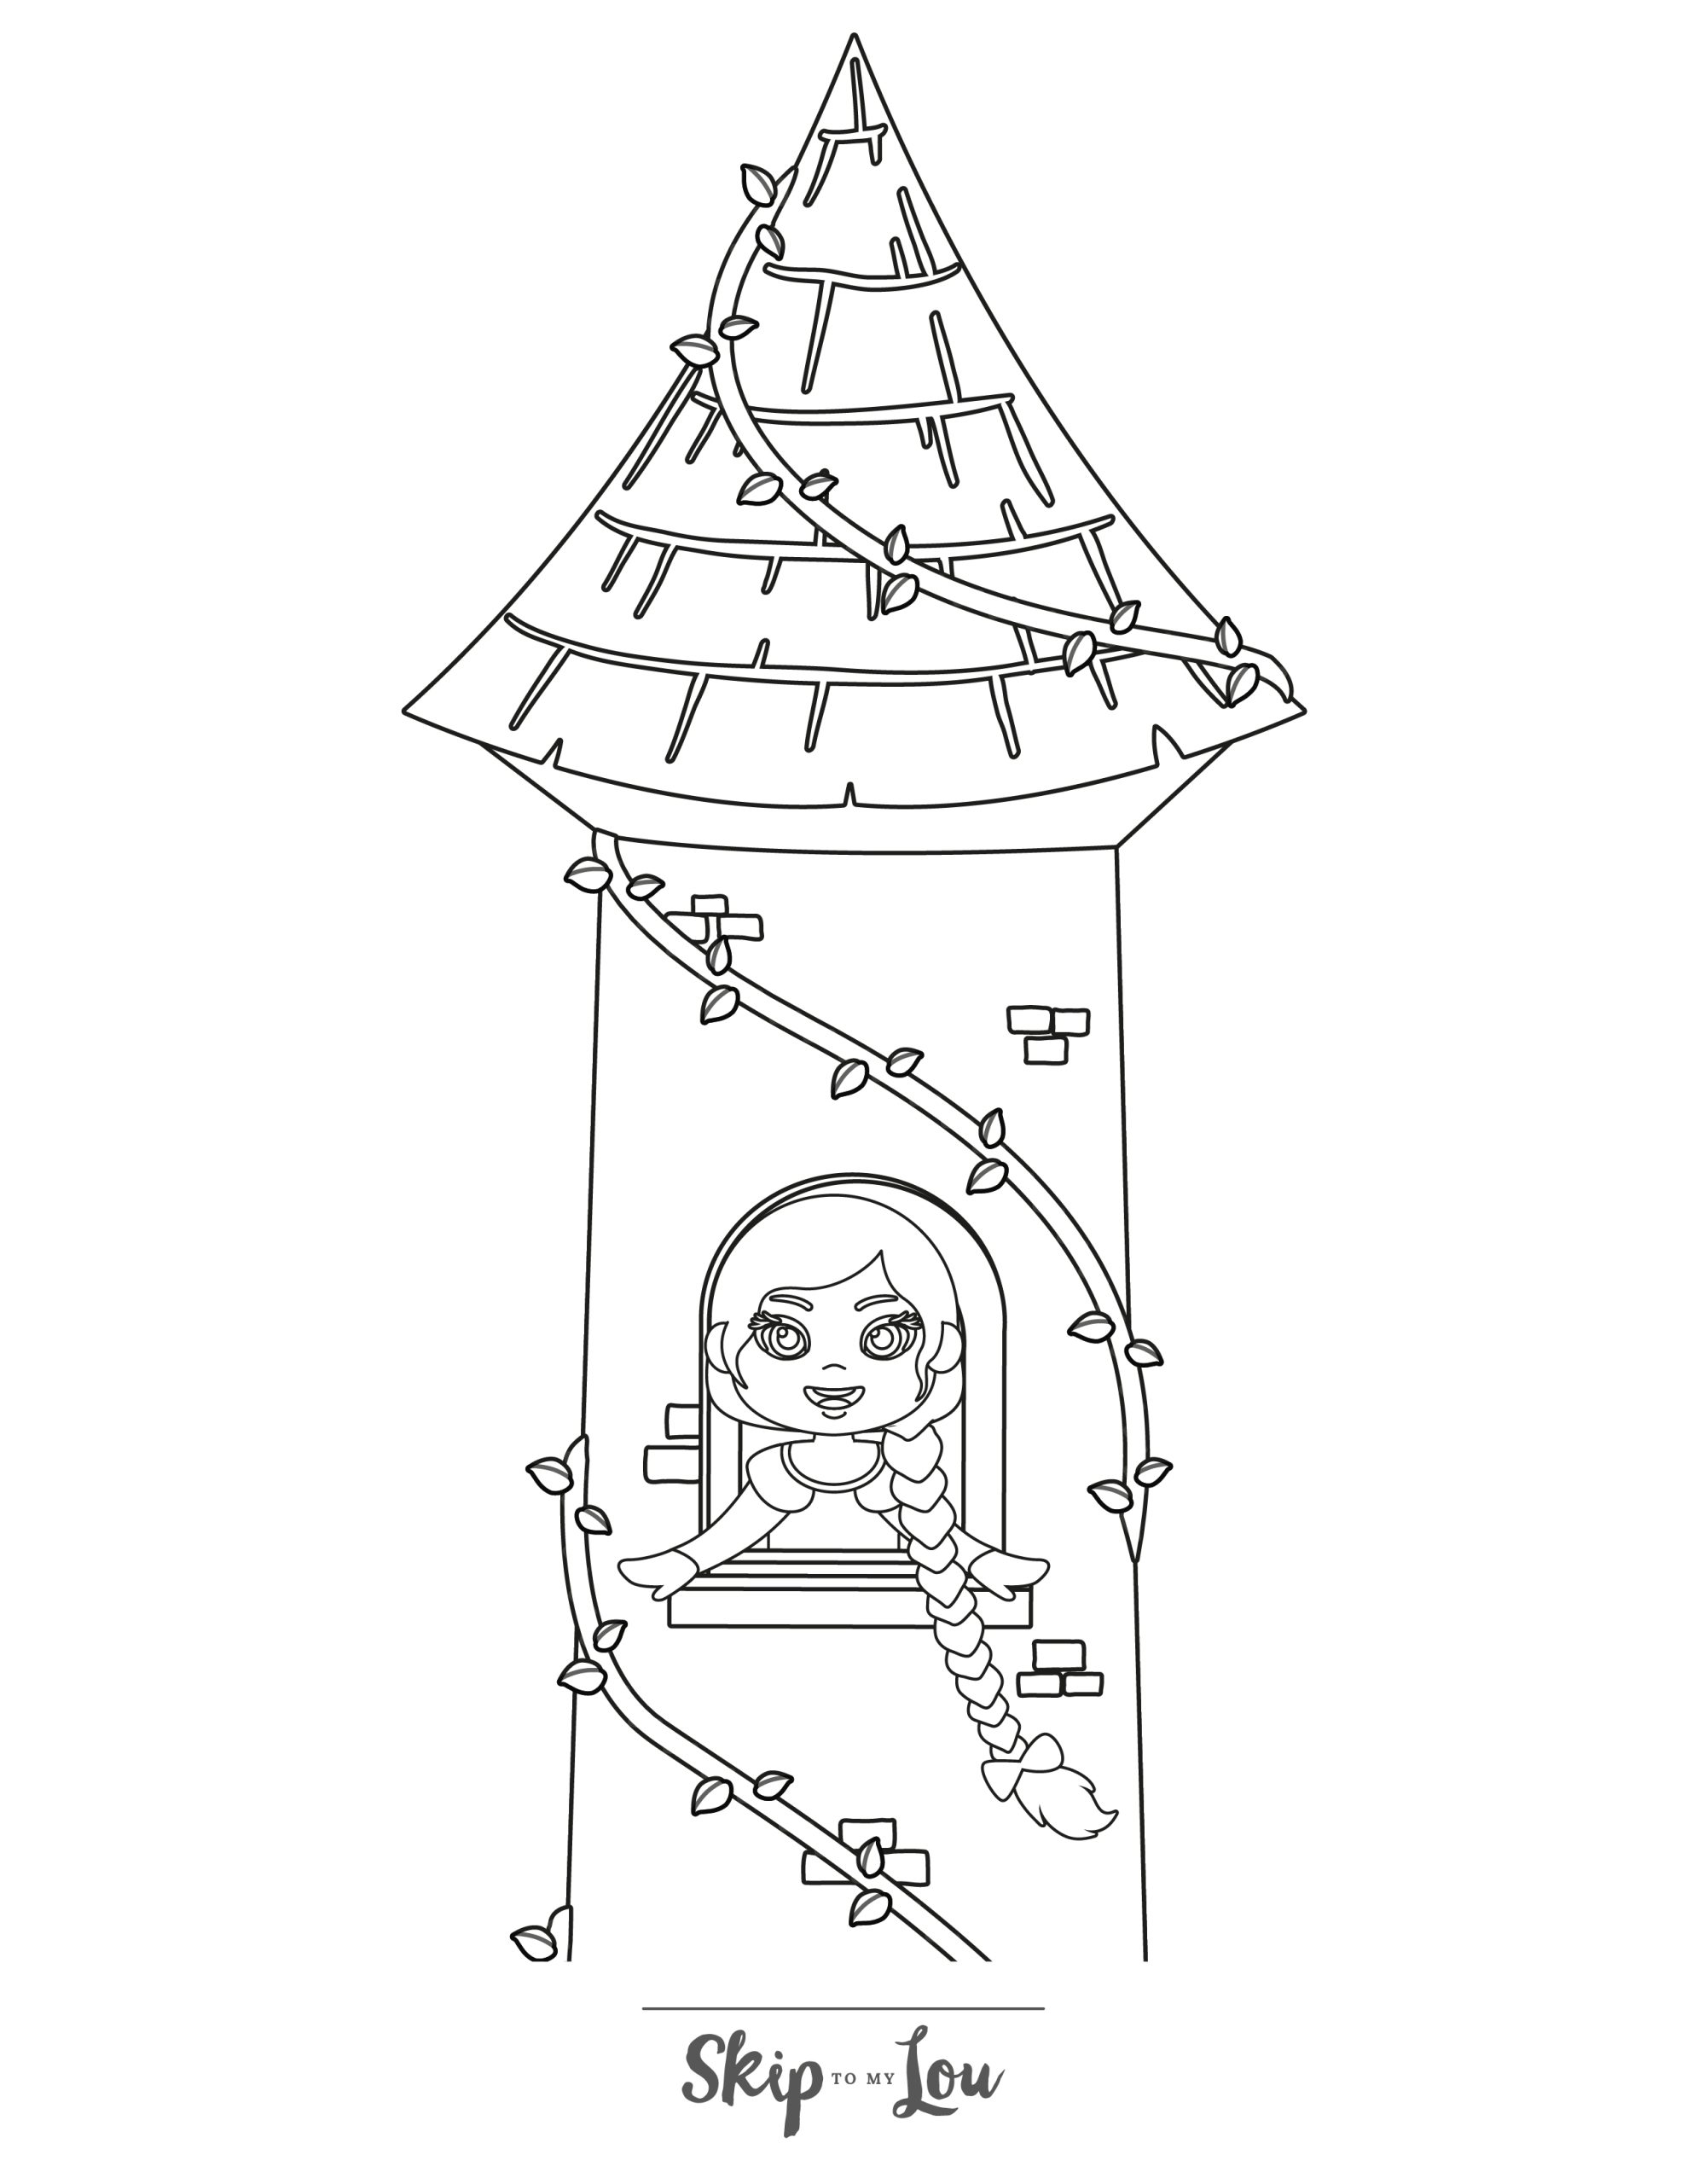 Skip to my Lou - Rapunzel Coloring Pages - Line drawing of Rapunzel in her tower window with her hair dangling down